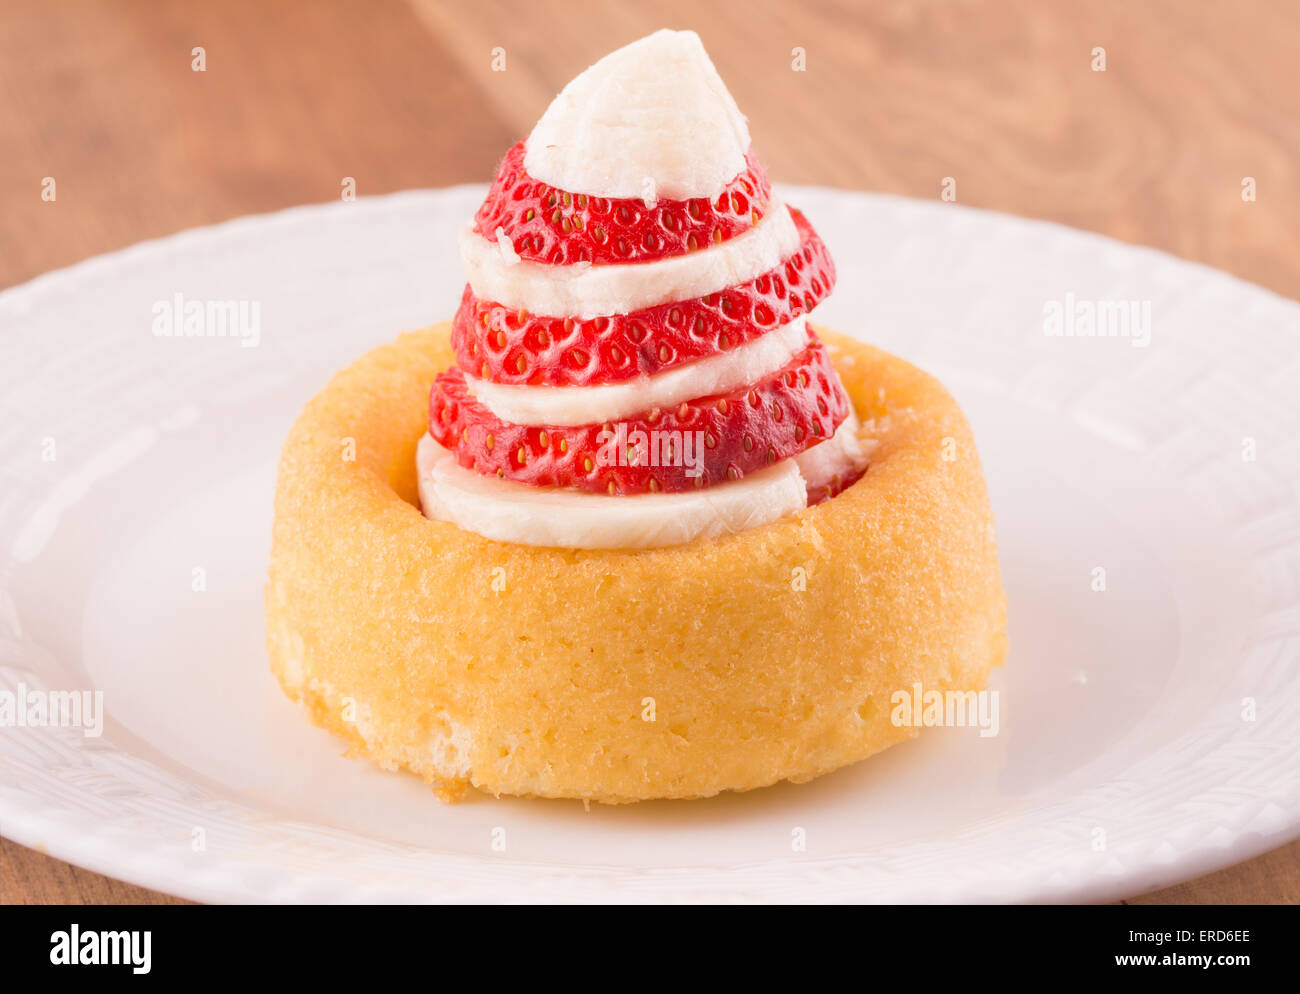 Dessert shell with sliced banana and strawberry on a white plate Stock Photo